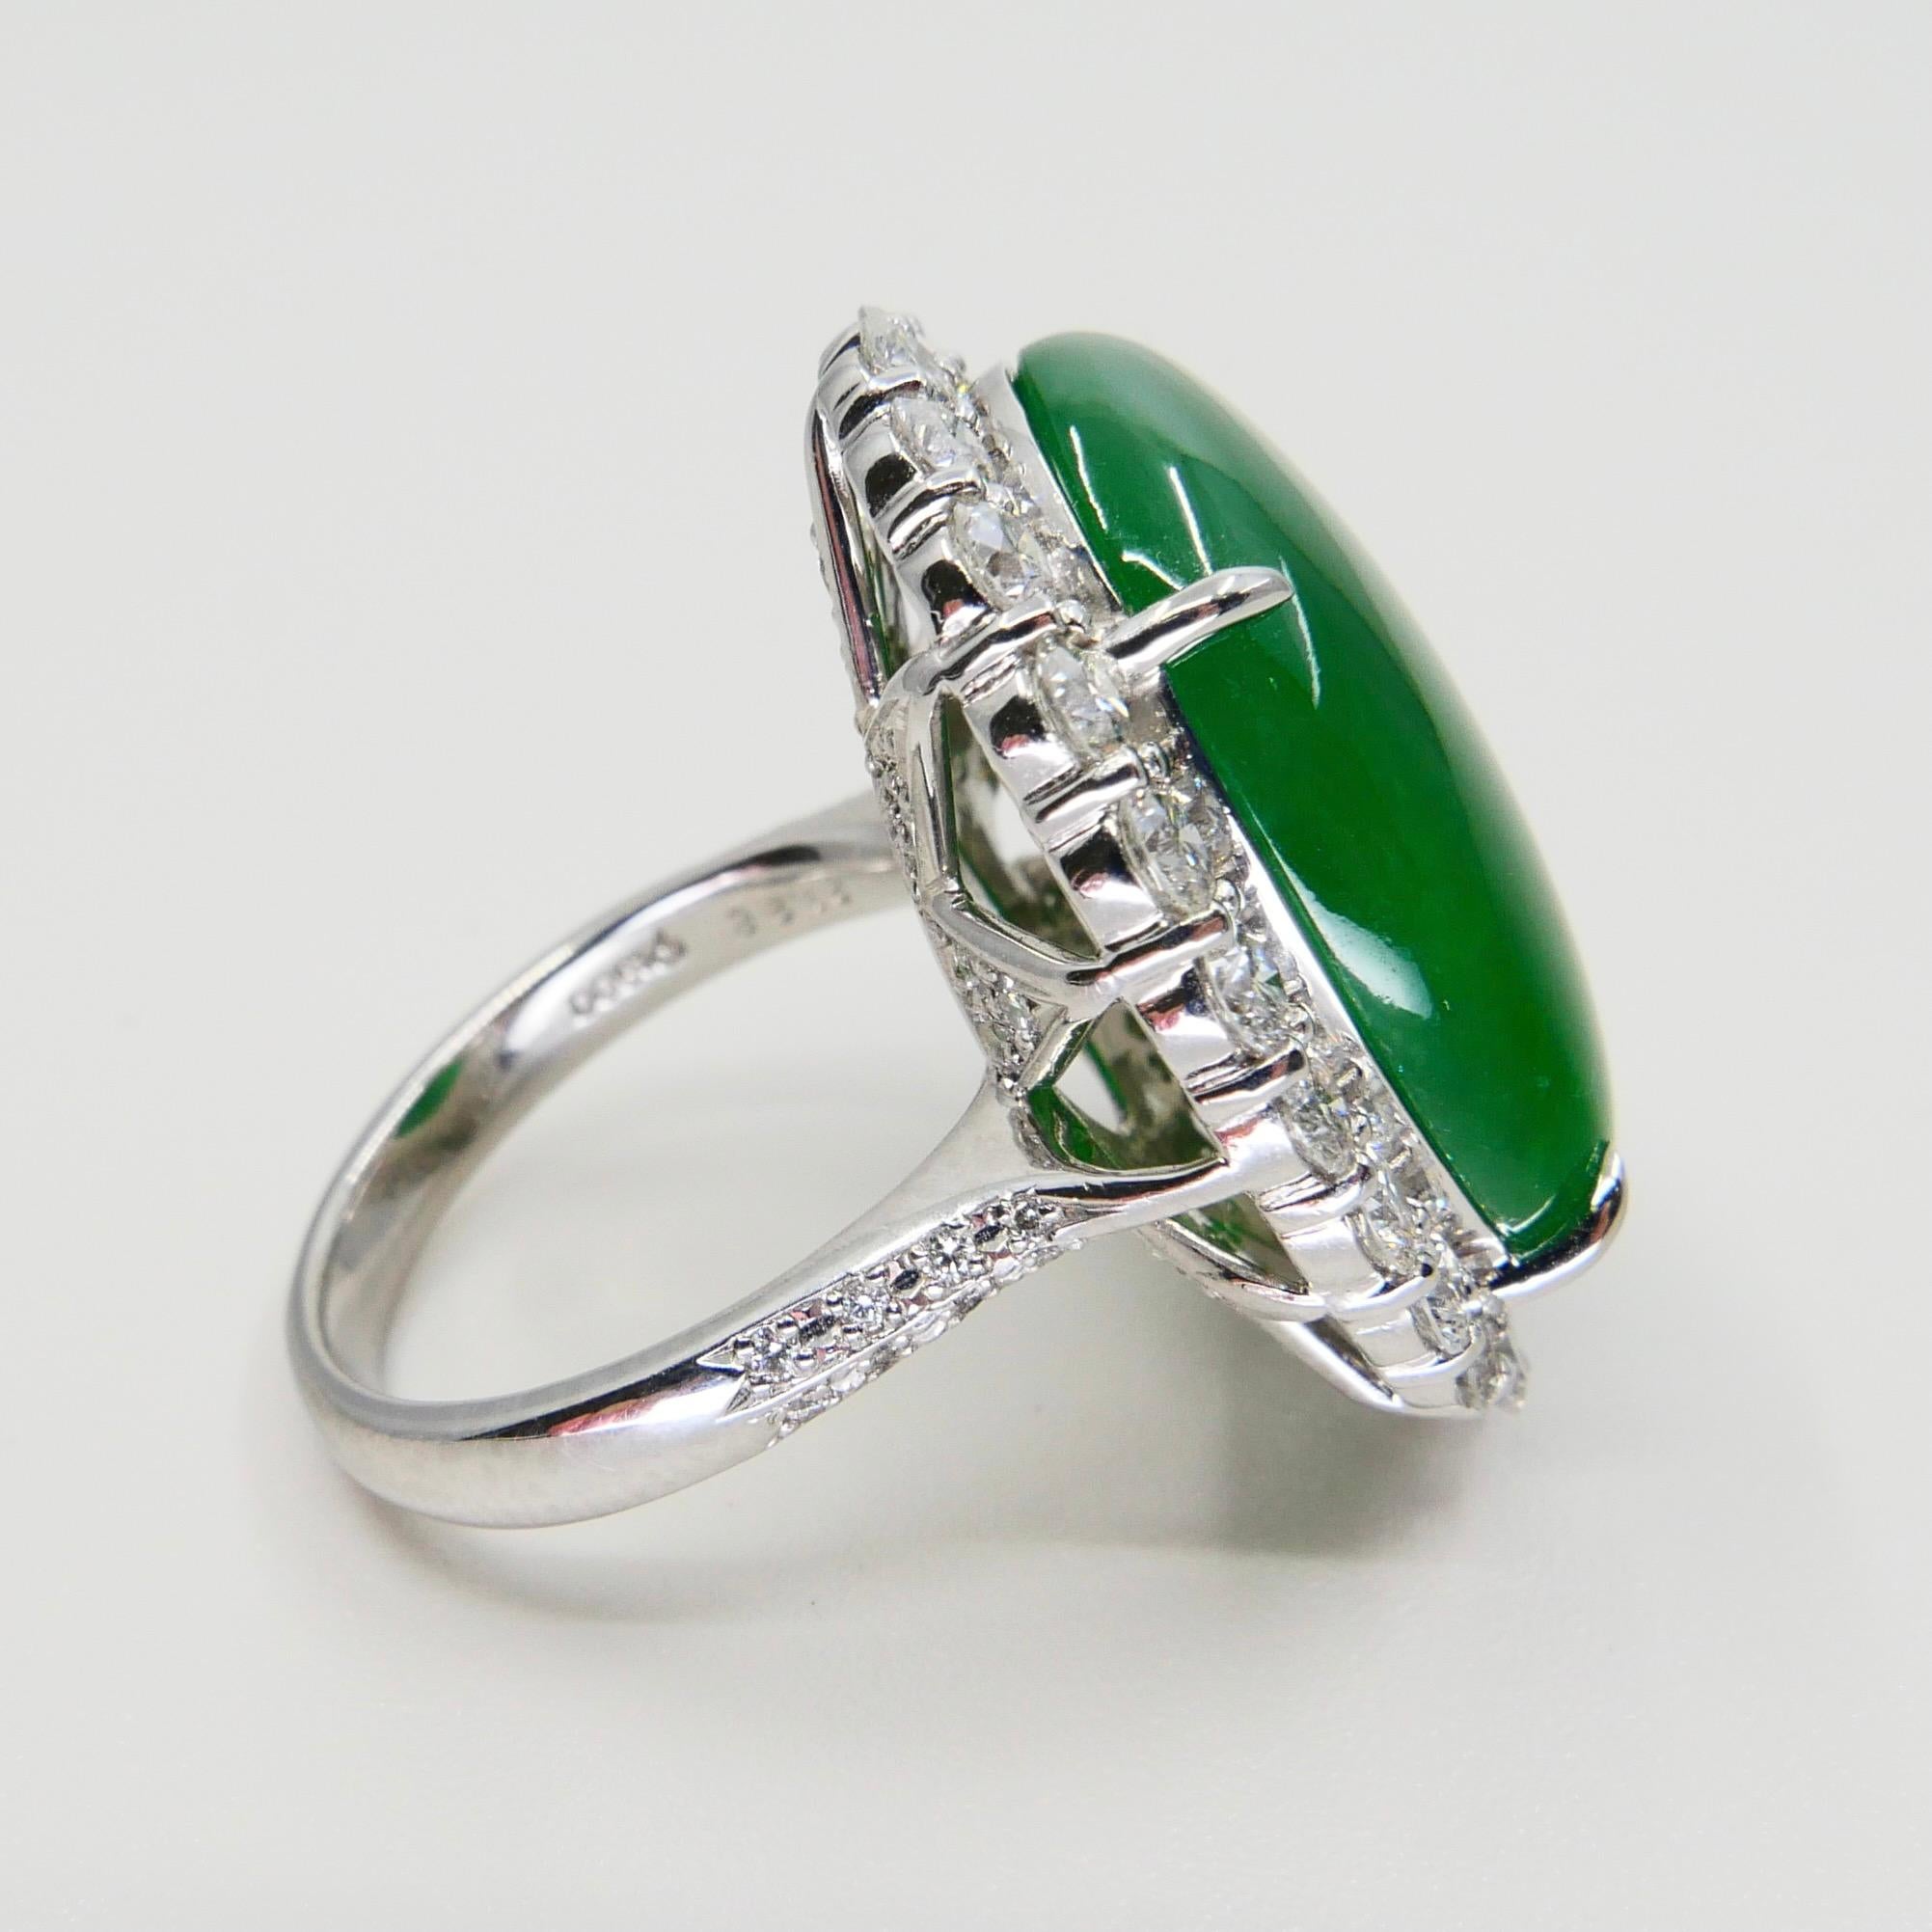 Certified 21 Cts Jade & Diamond Cocktail Ring, Intense Apple Green, Massive 7